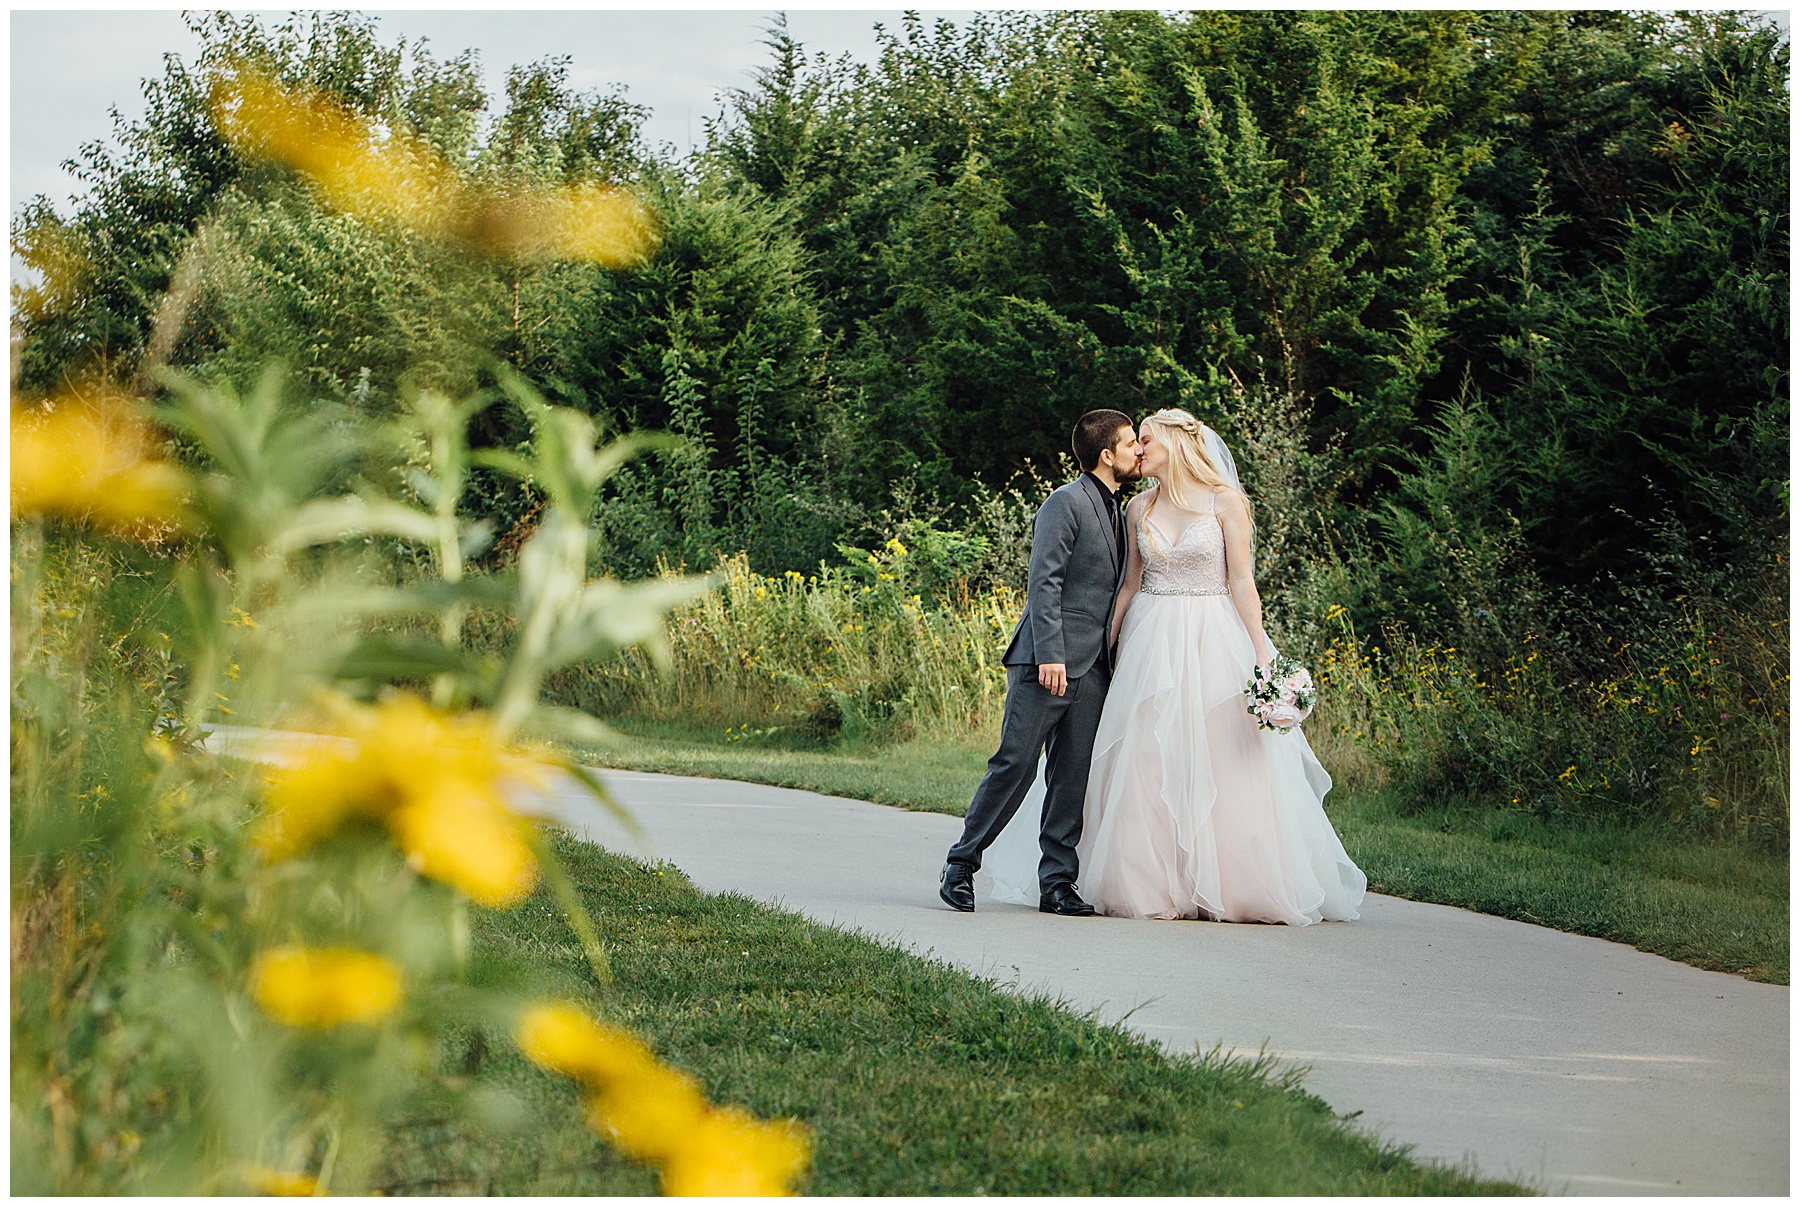 Andrea Bibeault: a wedding photojournalist specializes in real,photojournalistic wedding photography. Based in Omaha,we travel all over the midwest and country.,